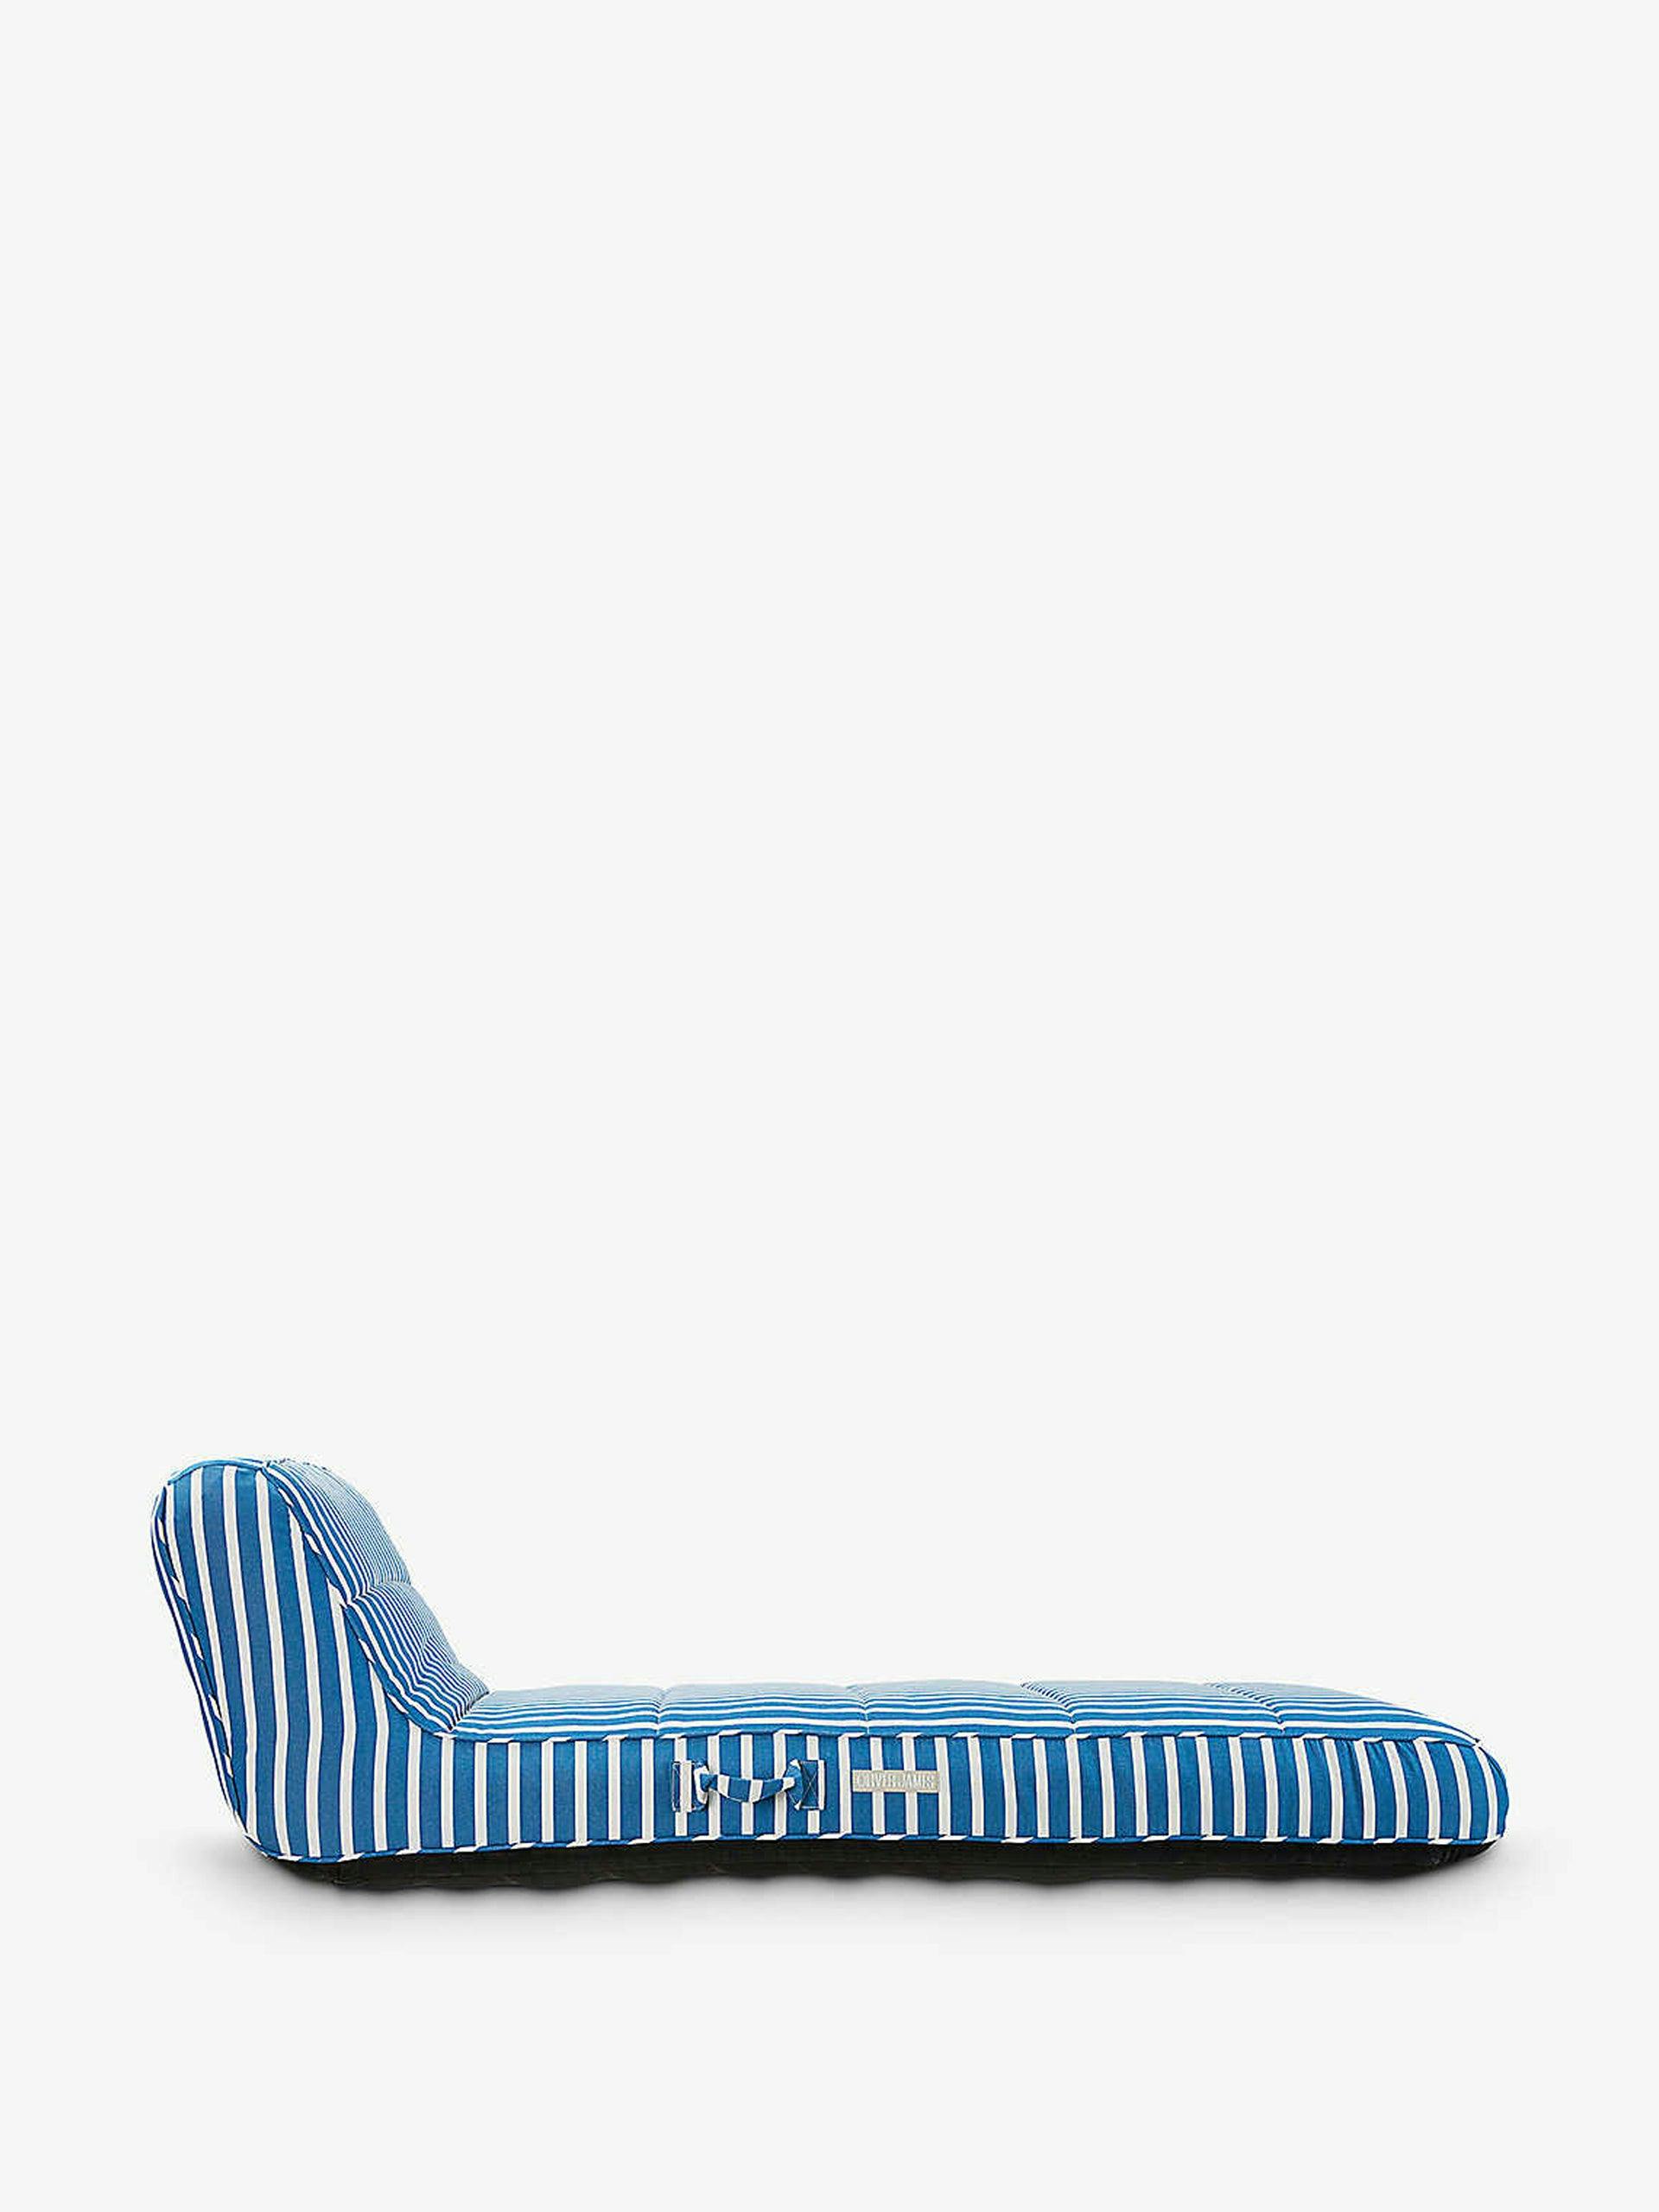 Blue and white stripe inflatable pool lounger